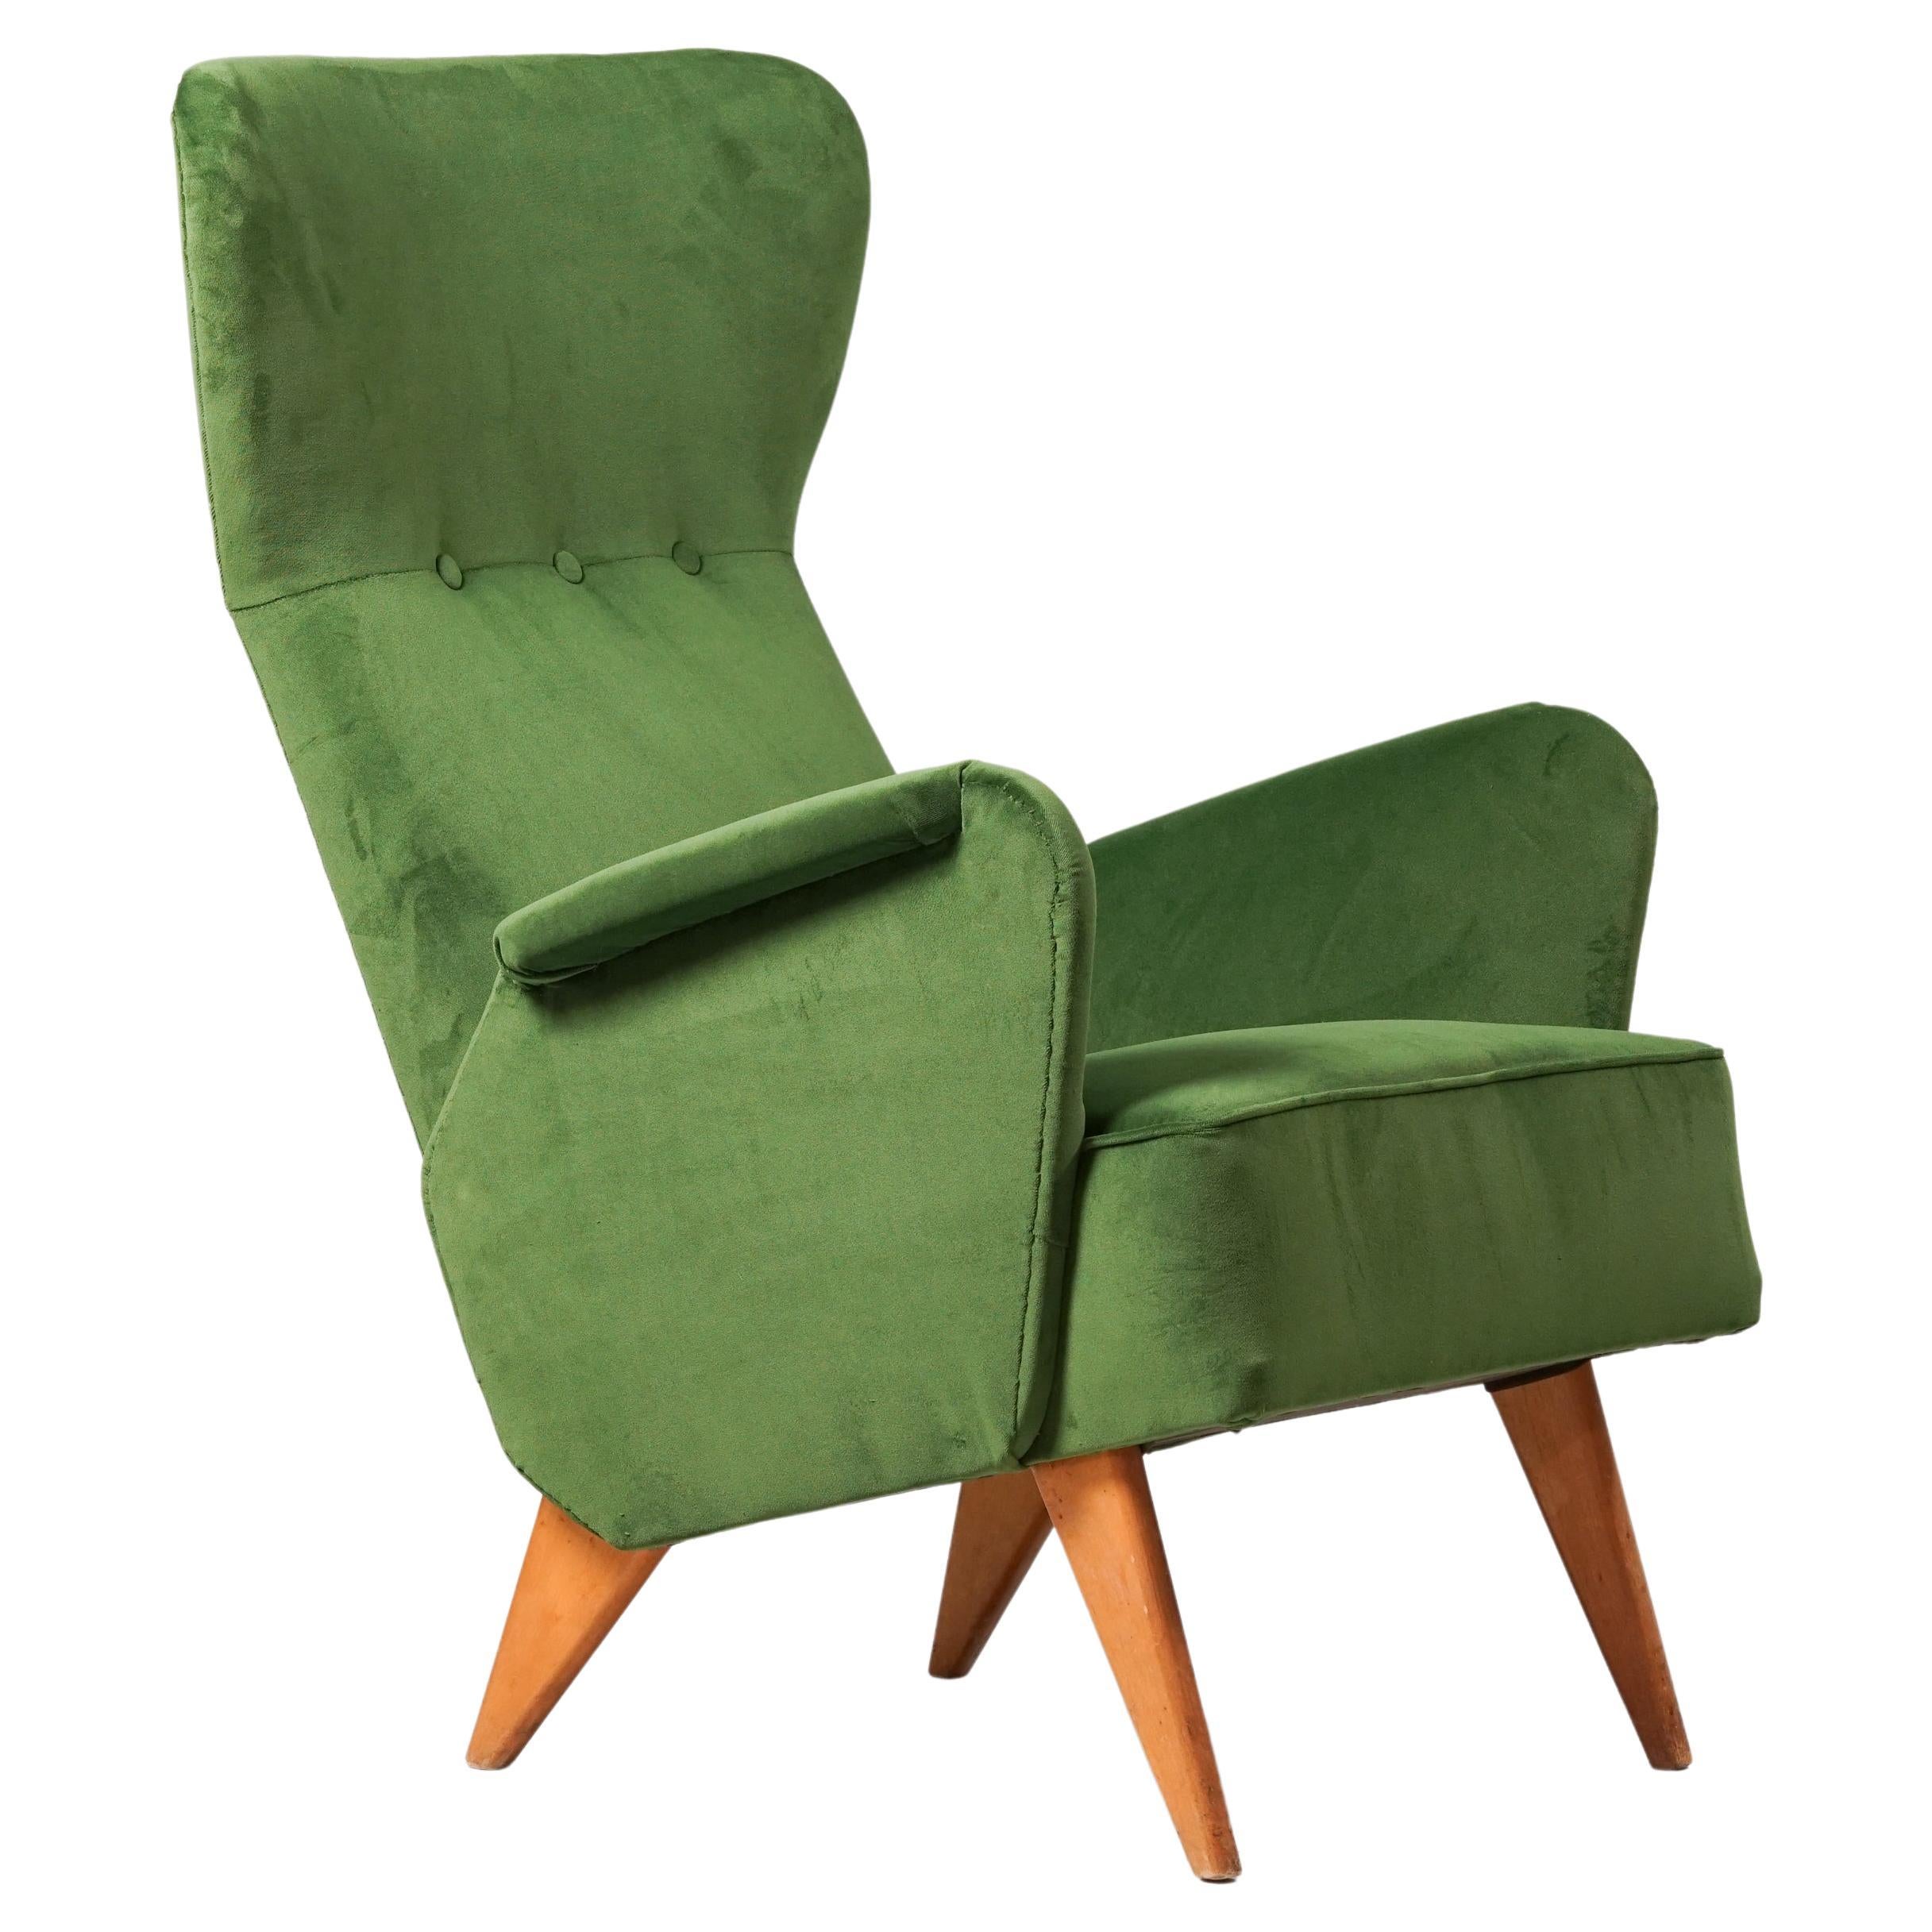 Lounge Chair, Carl Gustaf Hiort af Ornäs, Hiort tuote, 1950/1960s  For Sale